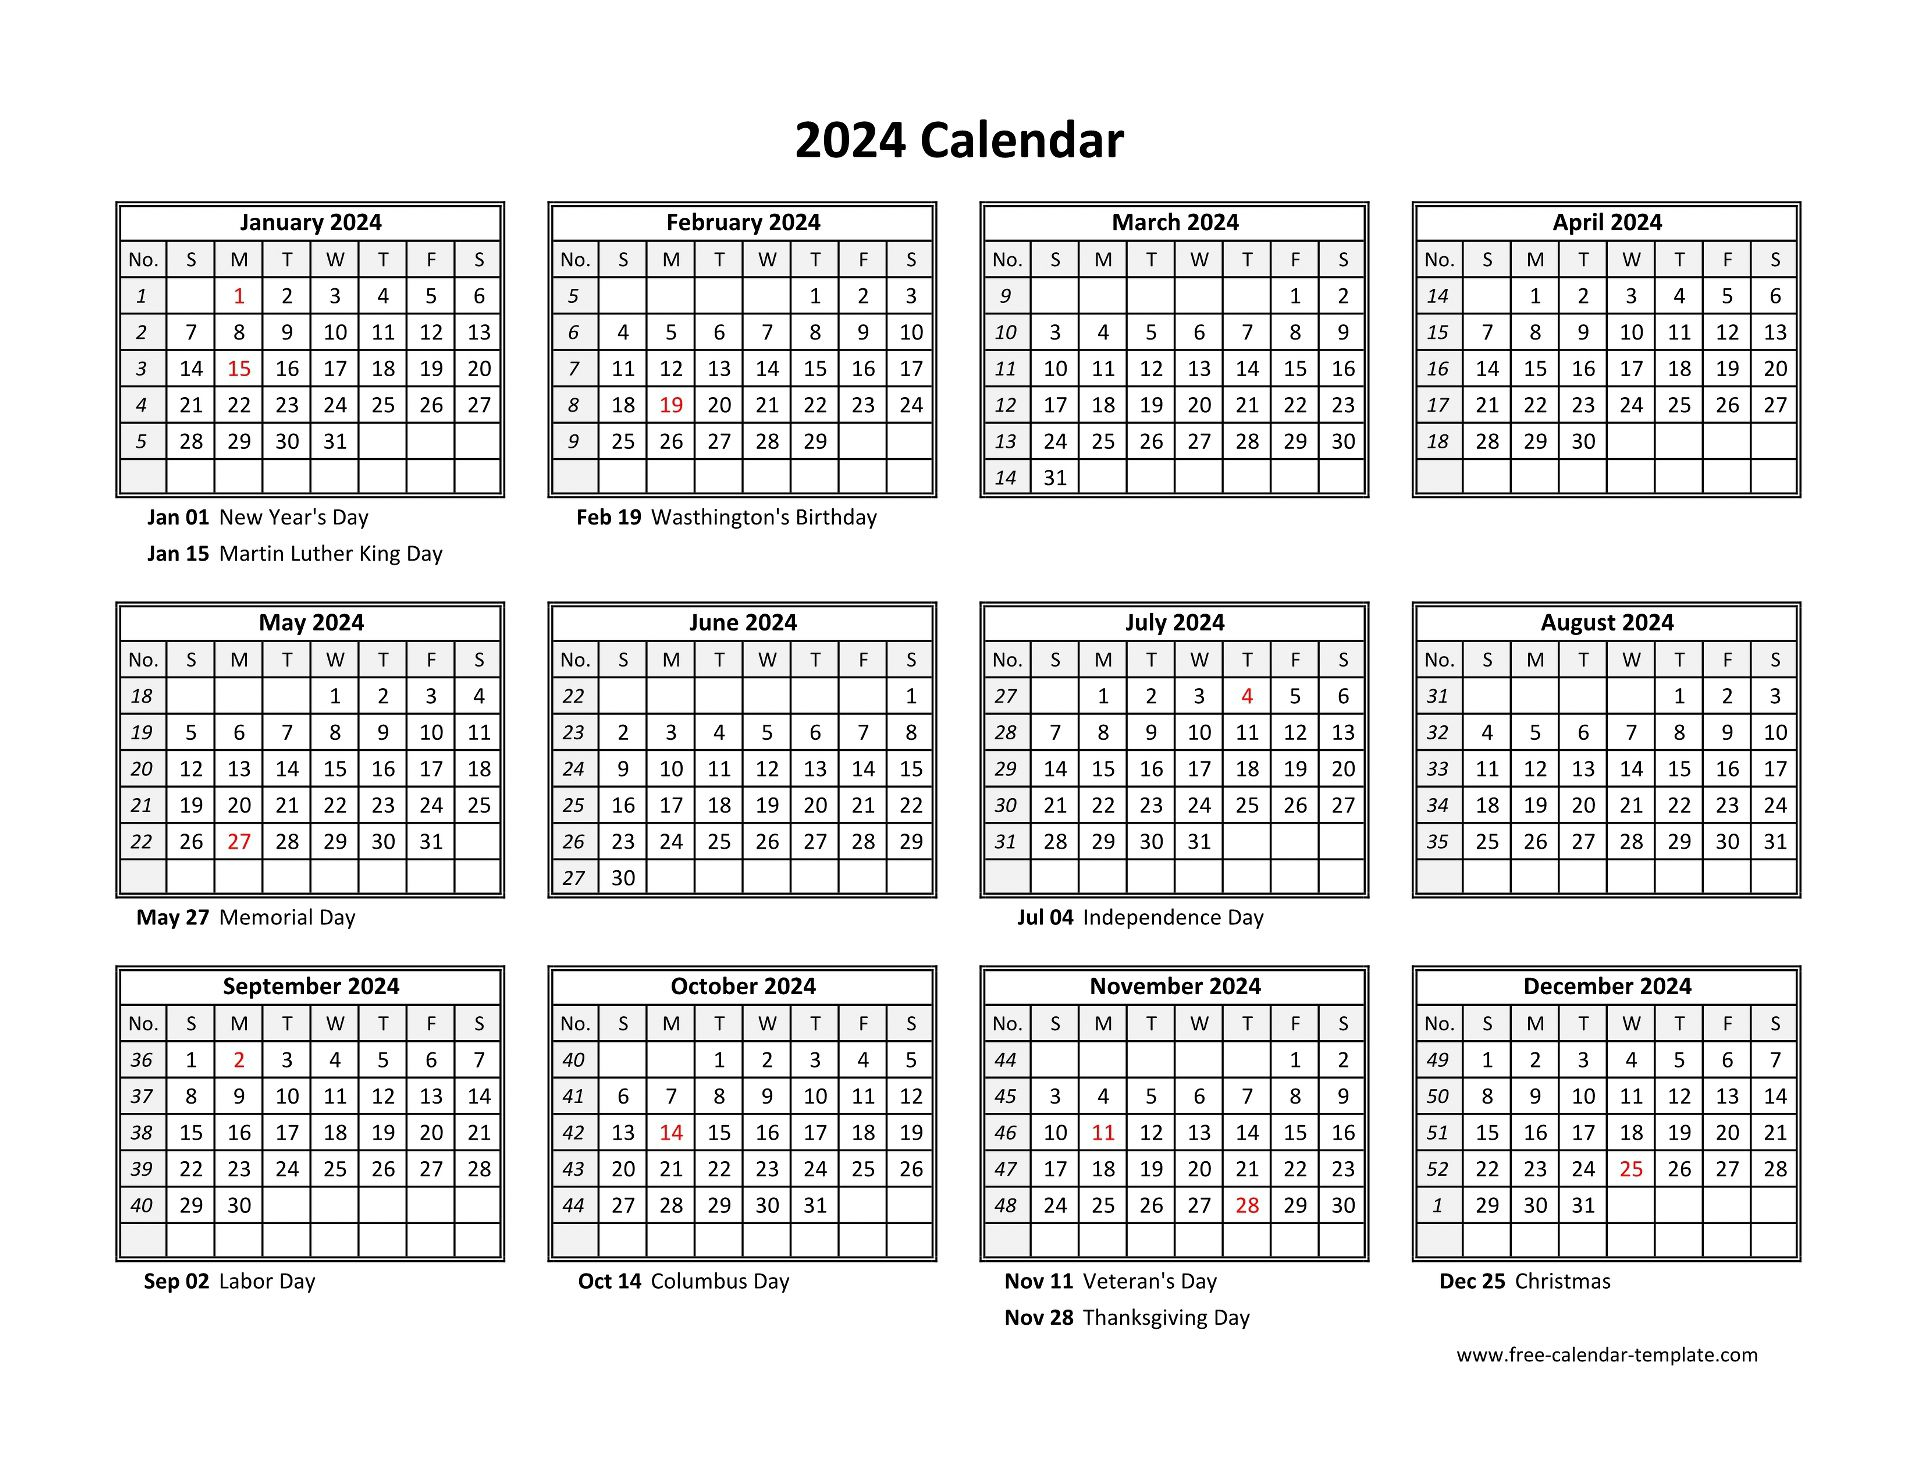 Yearly Calendar 2024 Printable With Federal Holidays | Free for 2024 Calendar Printable Months